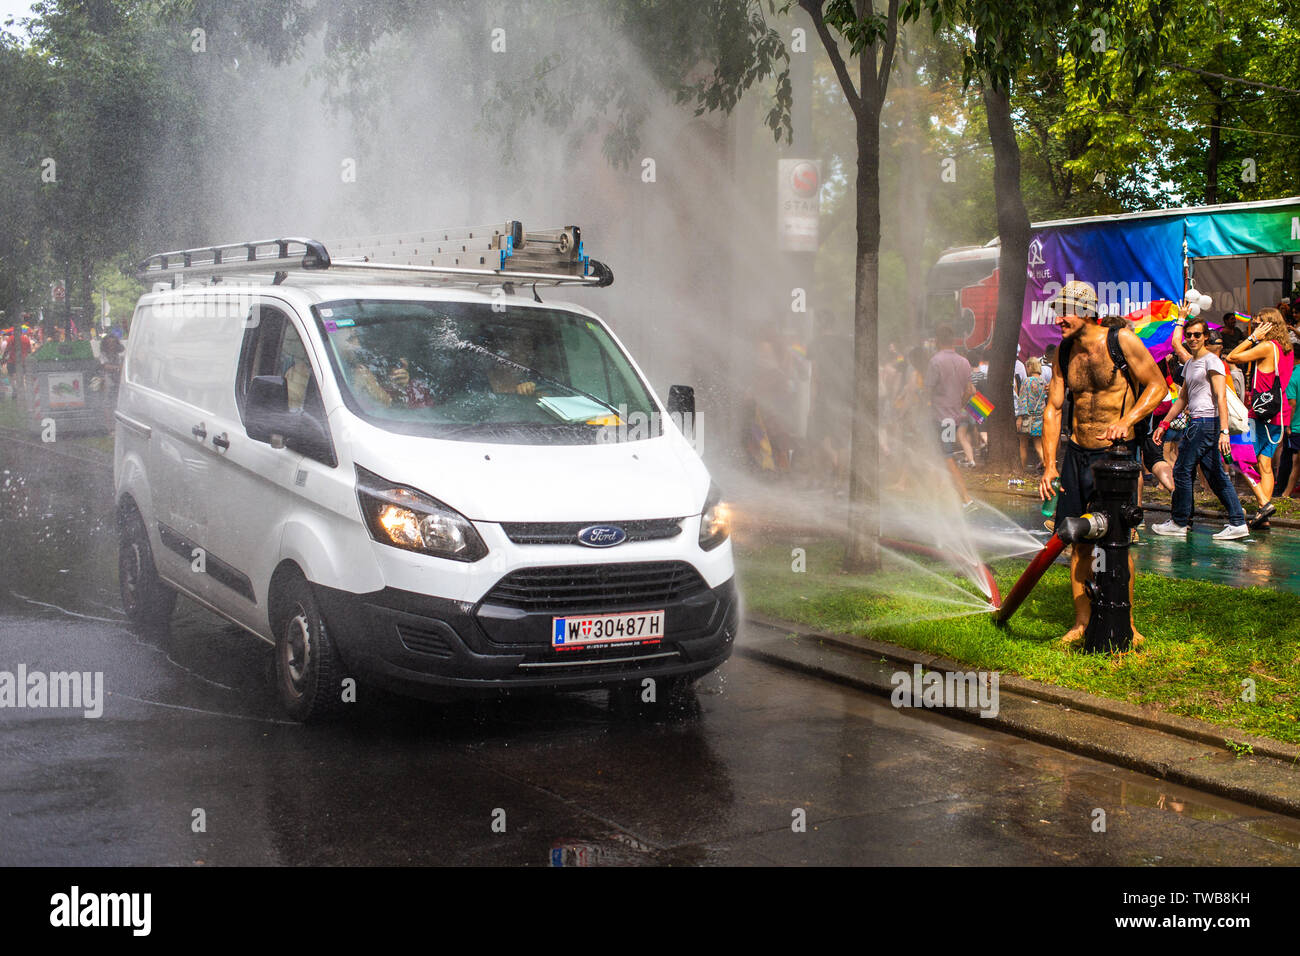 A white van passes a spraying jet of water at Euro Pride, the largest Pride event in Europe. Vienna 15 June 2019 Stock Photo